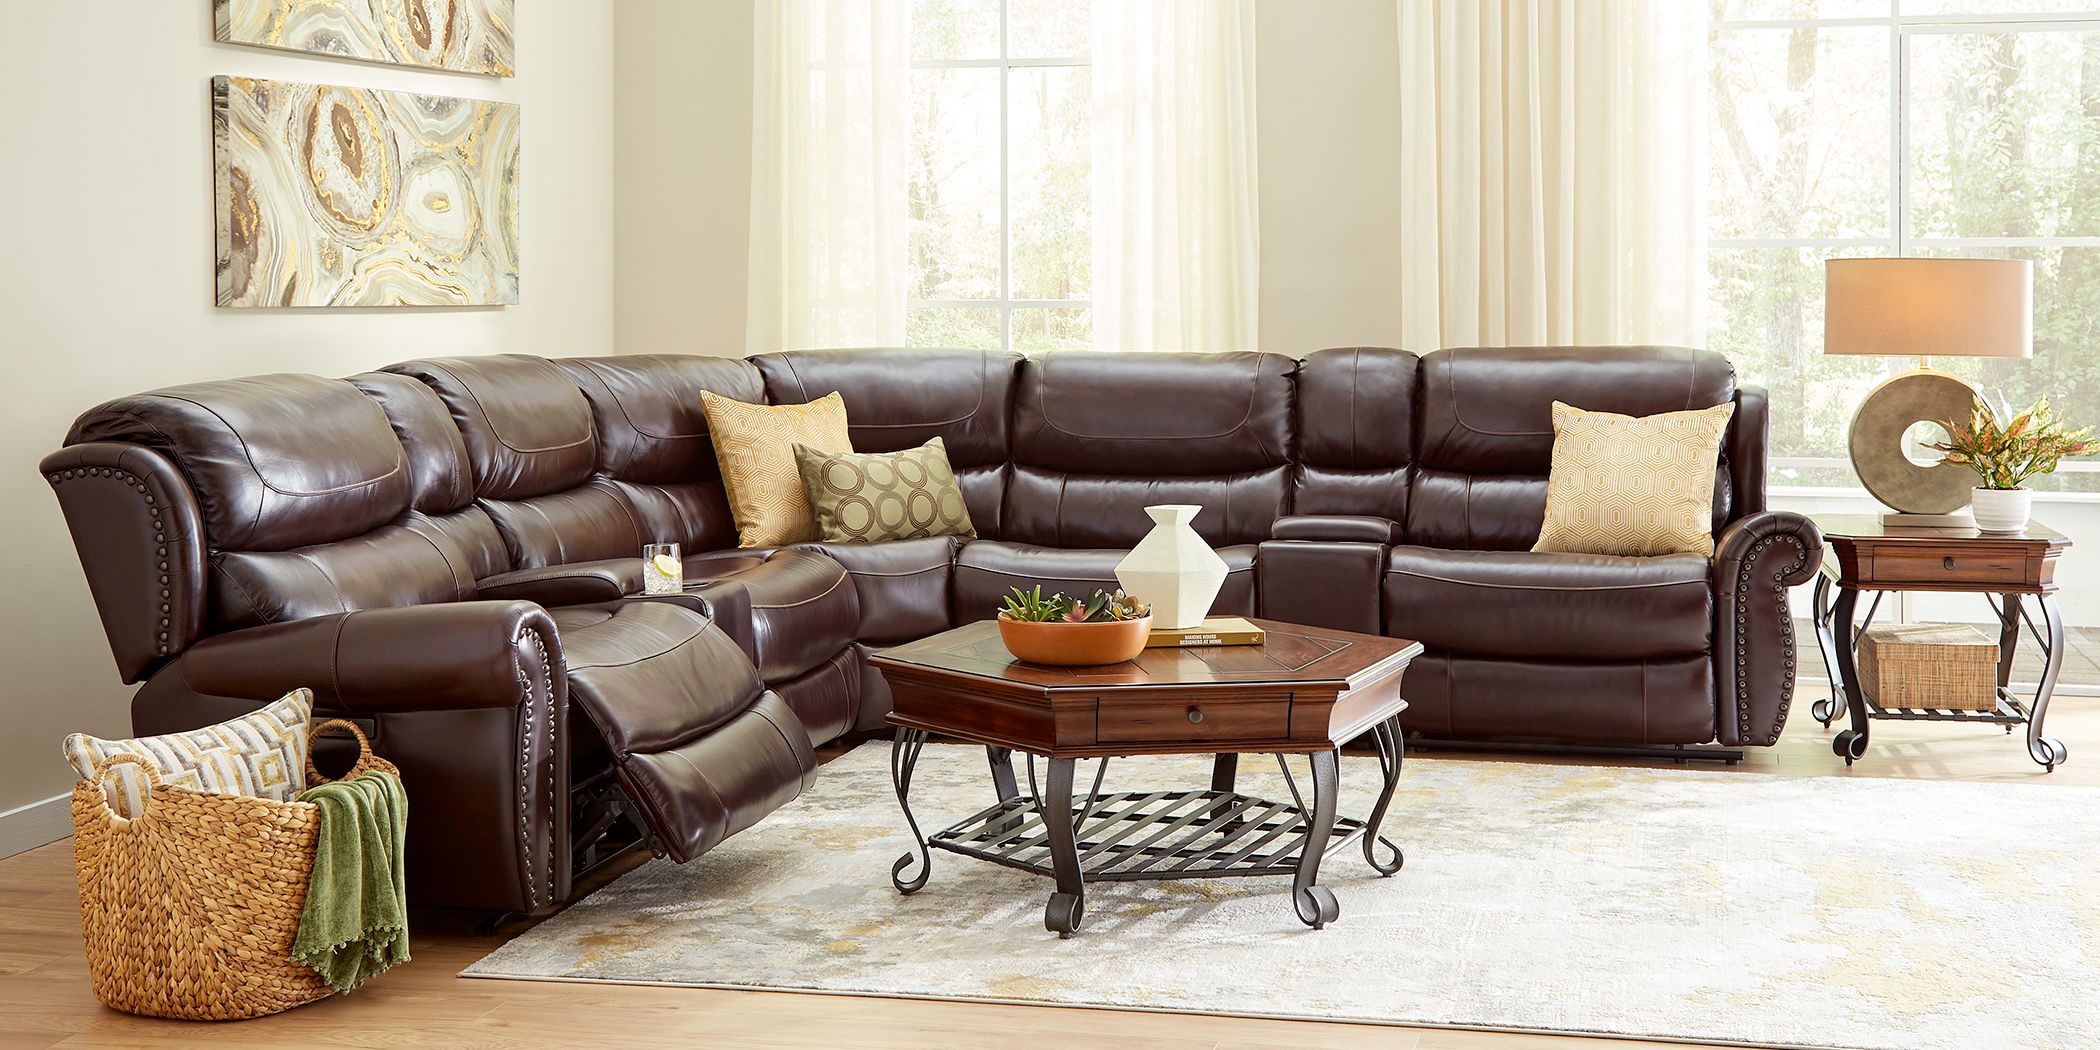 Venezio Brown Leather 7 Pc Dual Power Reclining Sectional - Rooms To Go